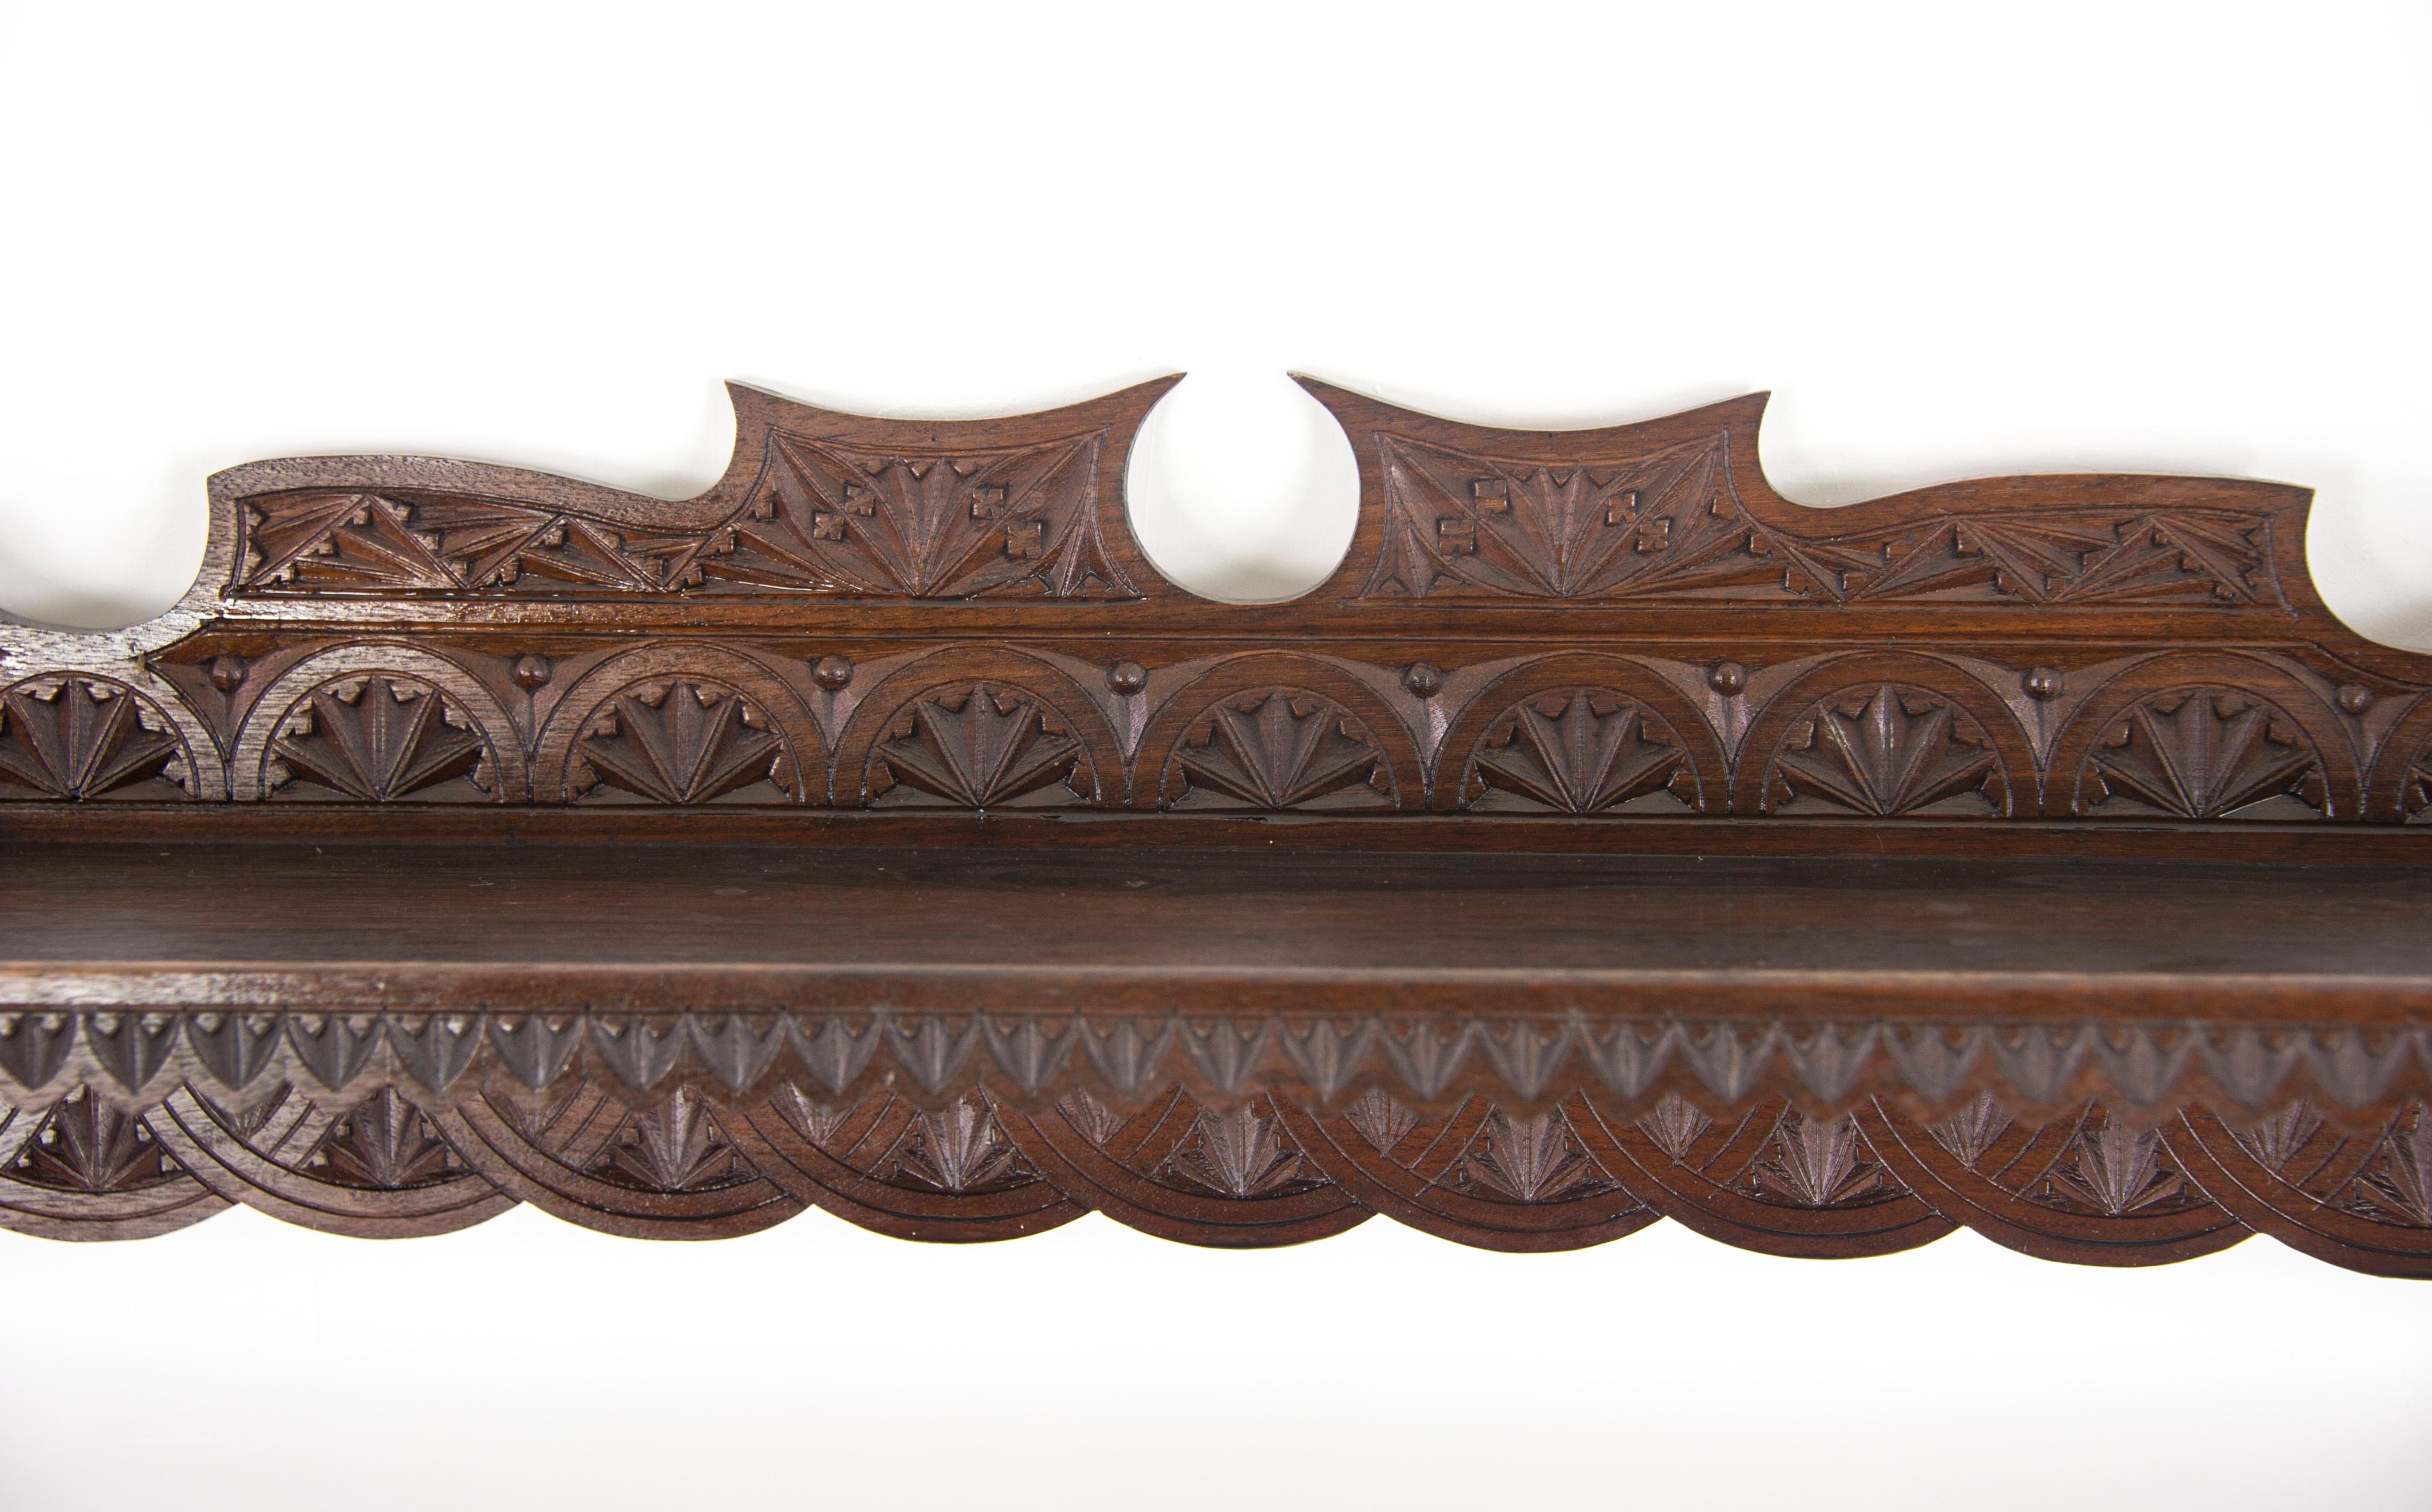 Antique plate rack, solid walnut, Victorian, chip carved, hanging shelf, Scotland, 1880

Scotland, 1889
Solid walnut construction
Original finish
Smothered in crisp chip carving
Full shelf above
Three shelves below are grooved for the plats to sit